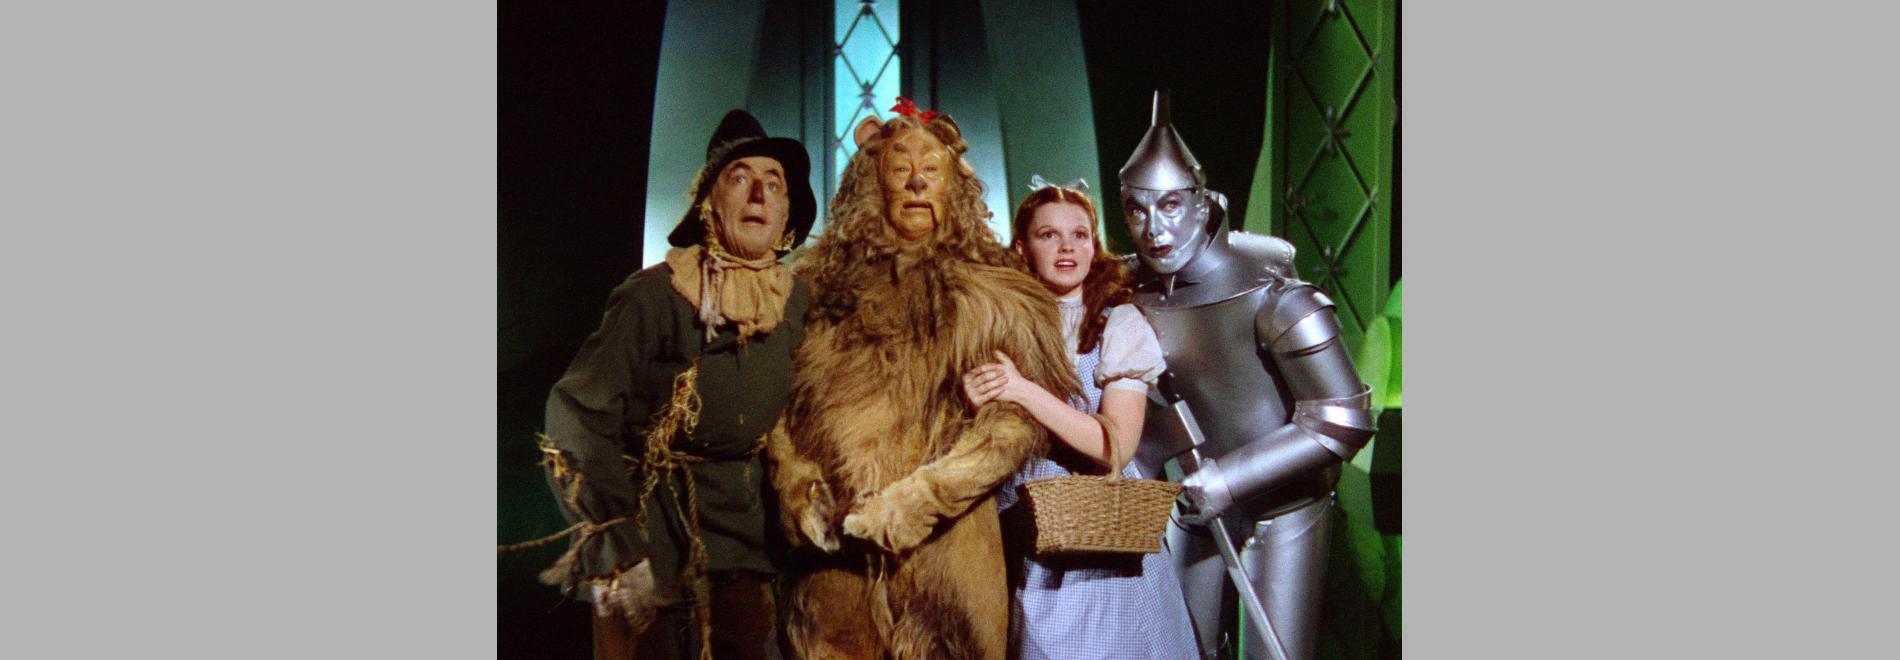 The Wizard of Oz (Victor Fleming, 1939)